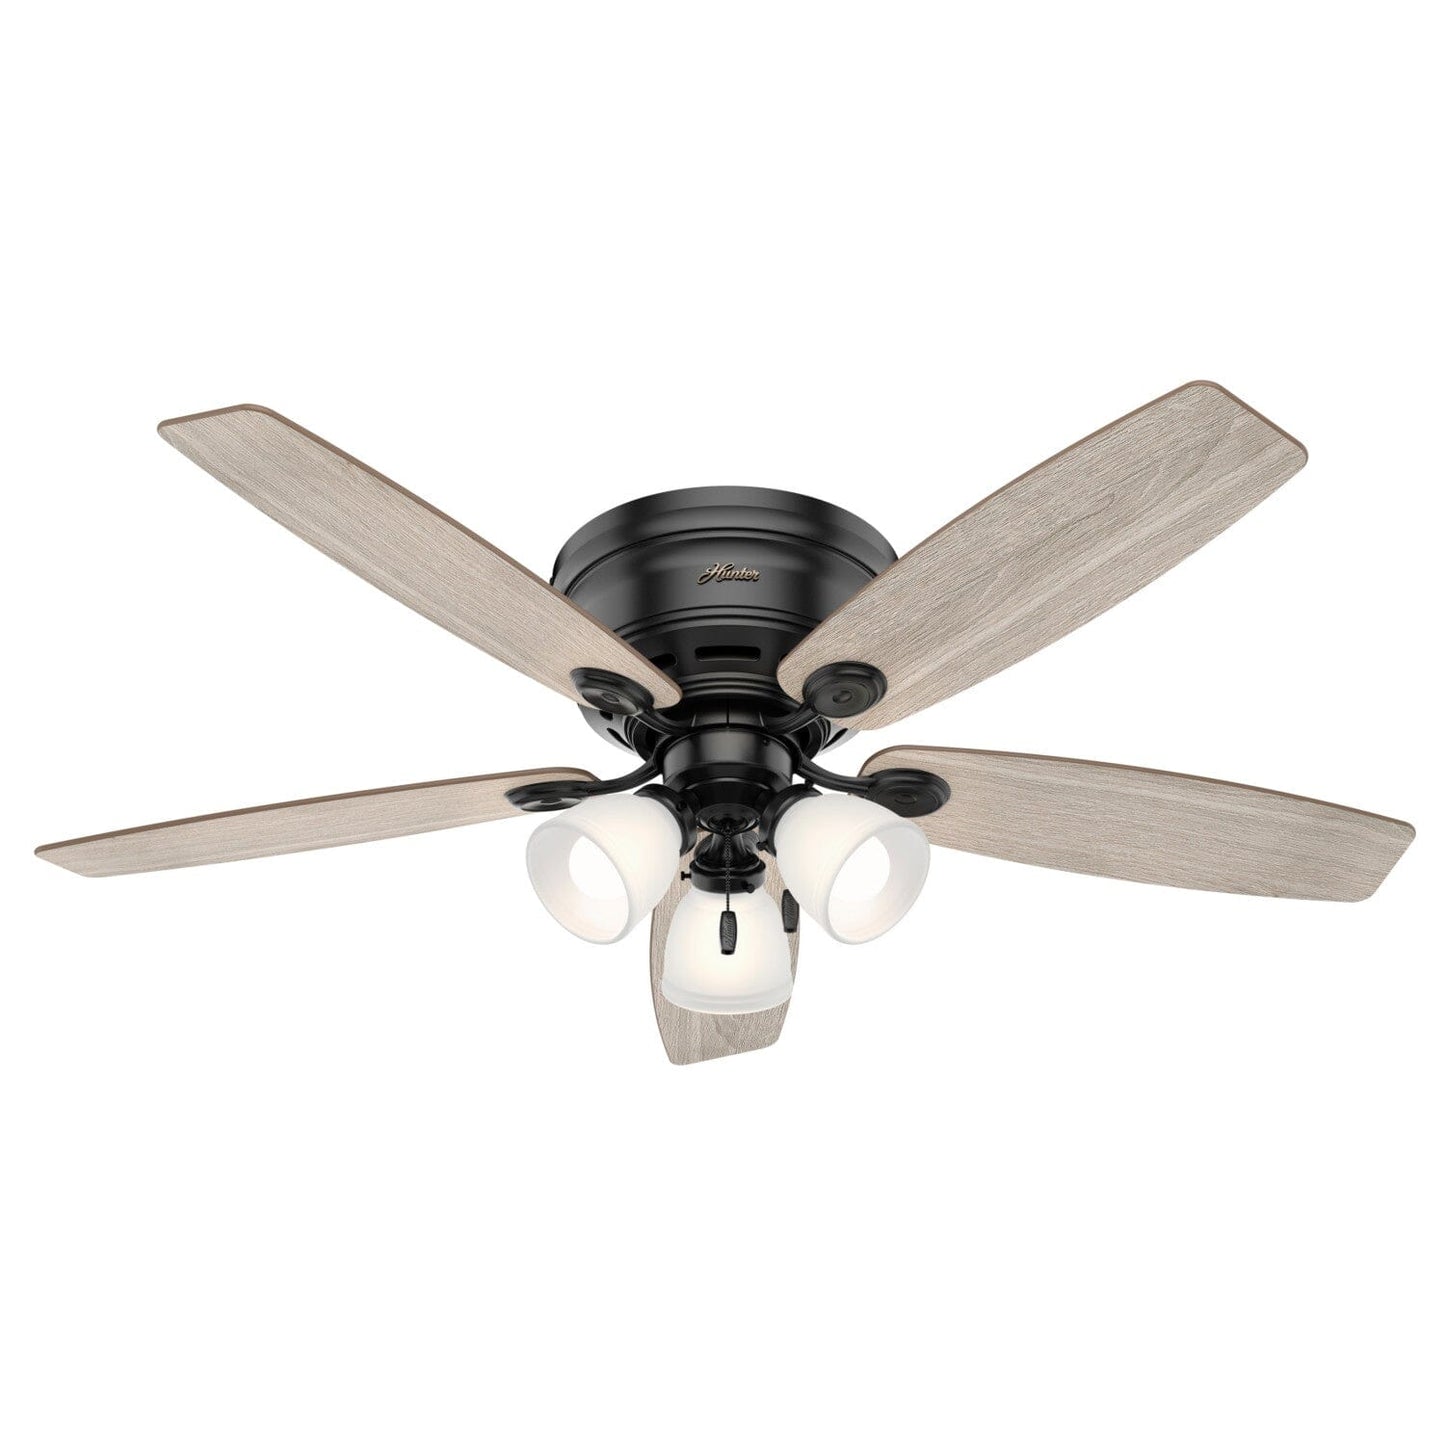 Low Profile With Led Light 52 In Ceiling Fan Hunter